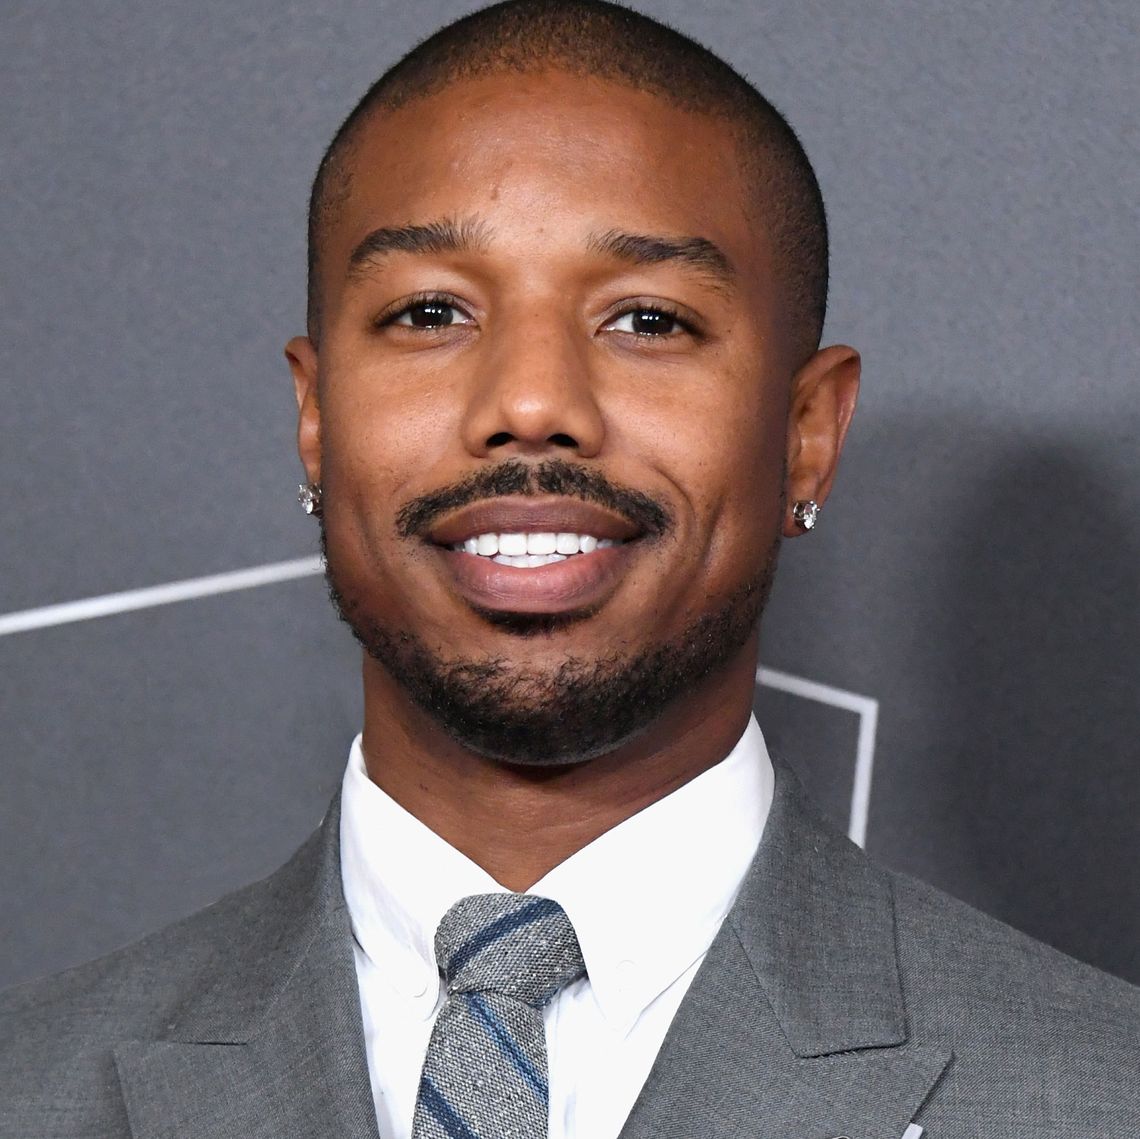 Instagram michaelbjordan: Clothes, Outfits, Brands, Style and Looks